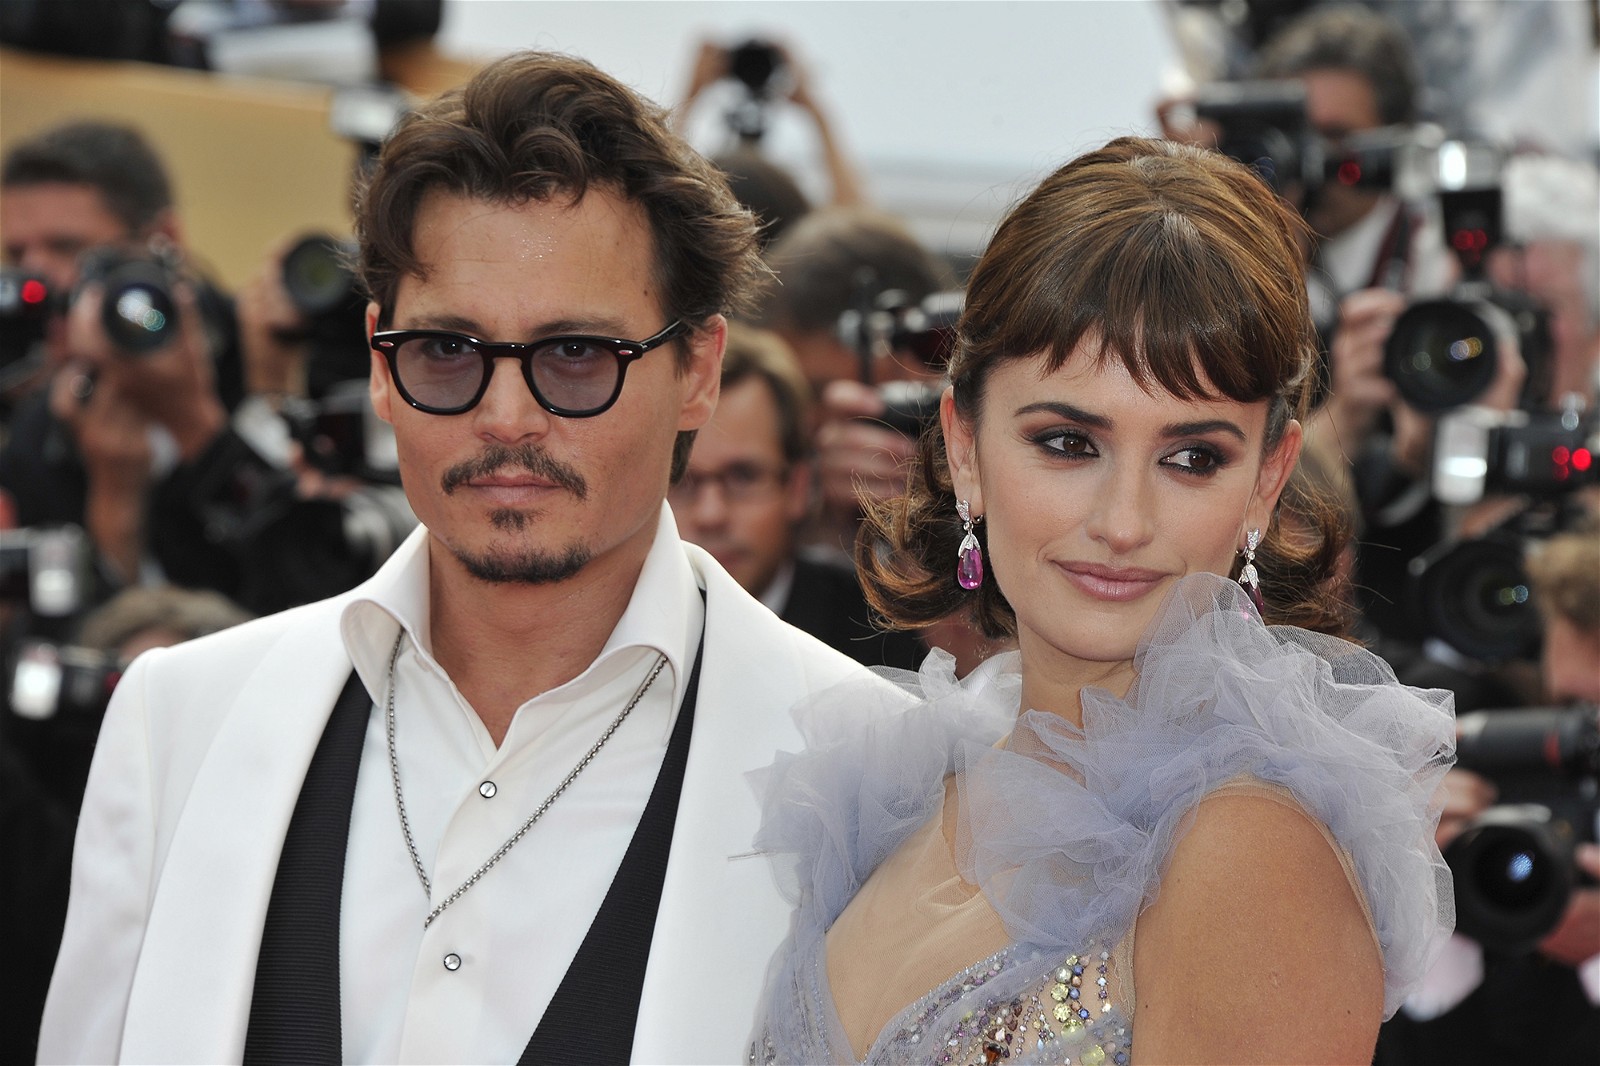 Johnny Depp and Penelope Cruz at the premiere of Pirates of the Caribbean: On Stranger Tides